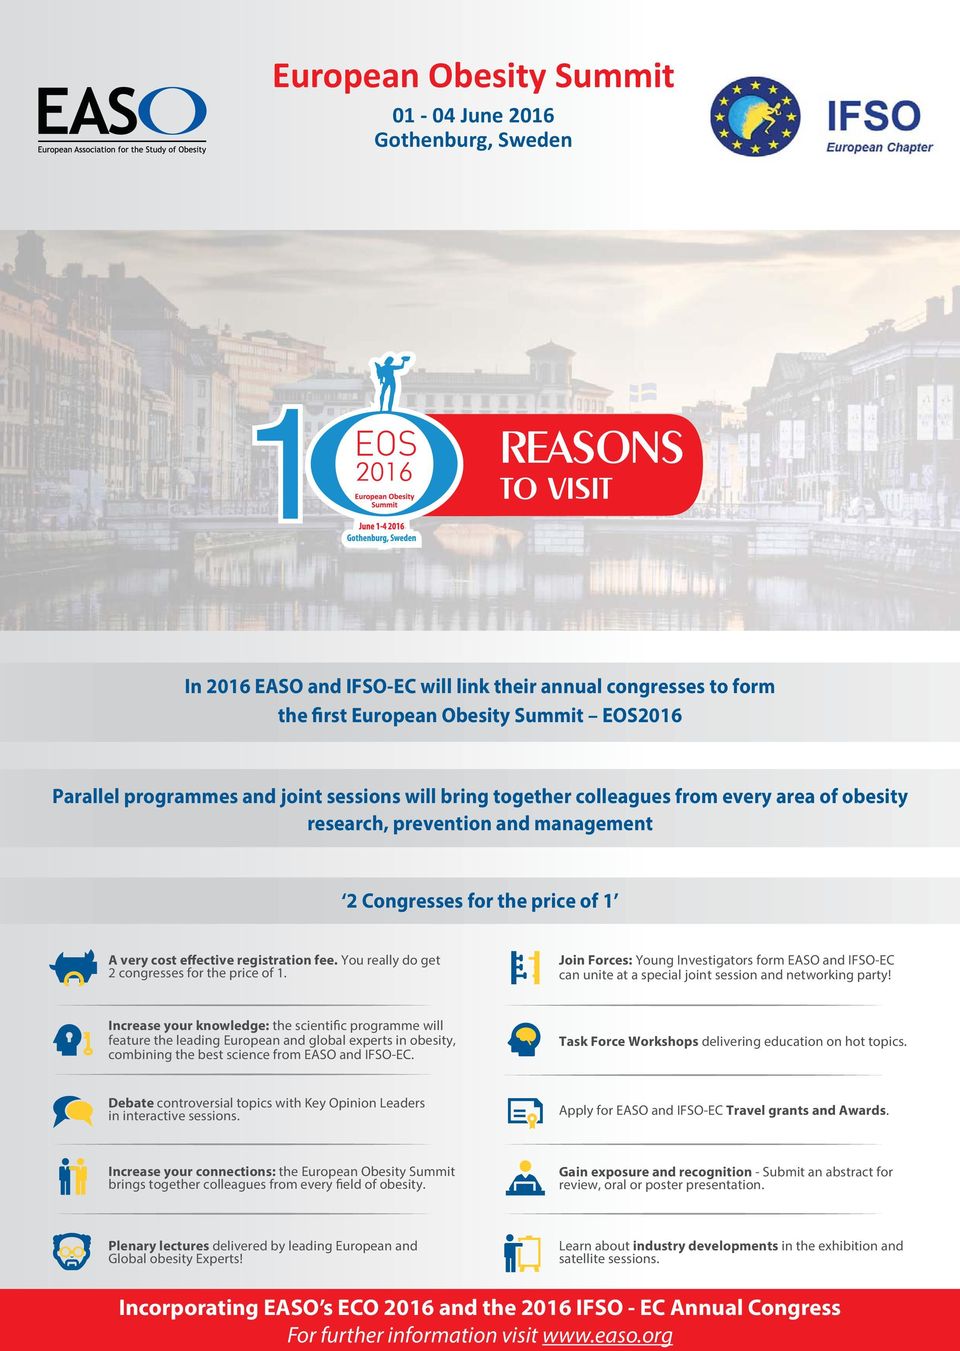 You really do get 2 congresses for the price of 1. Join Forces: Young Investigators form EASO and IFSO-EC can unite at a special joint session and networking party!